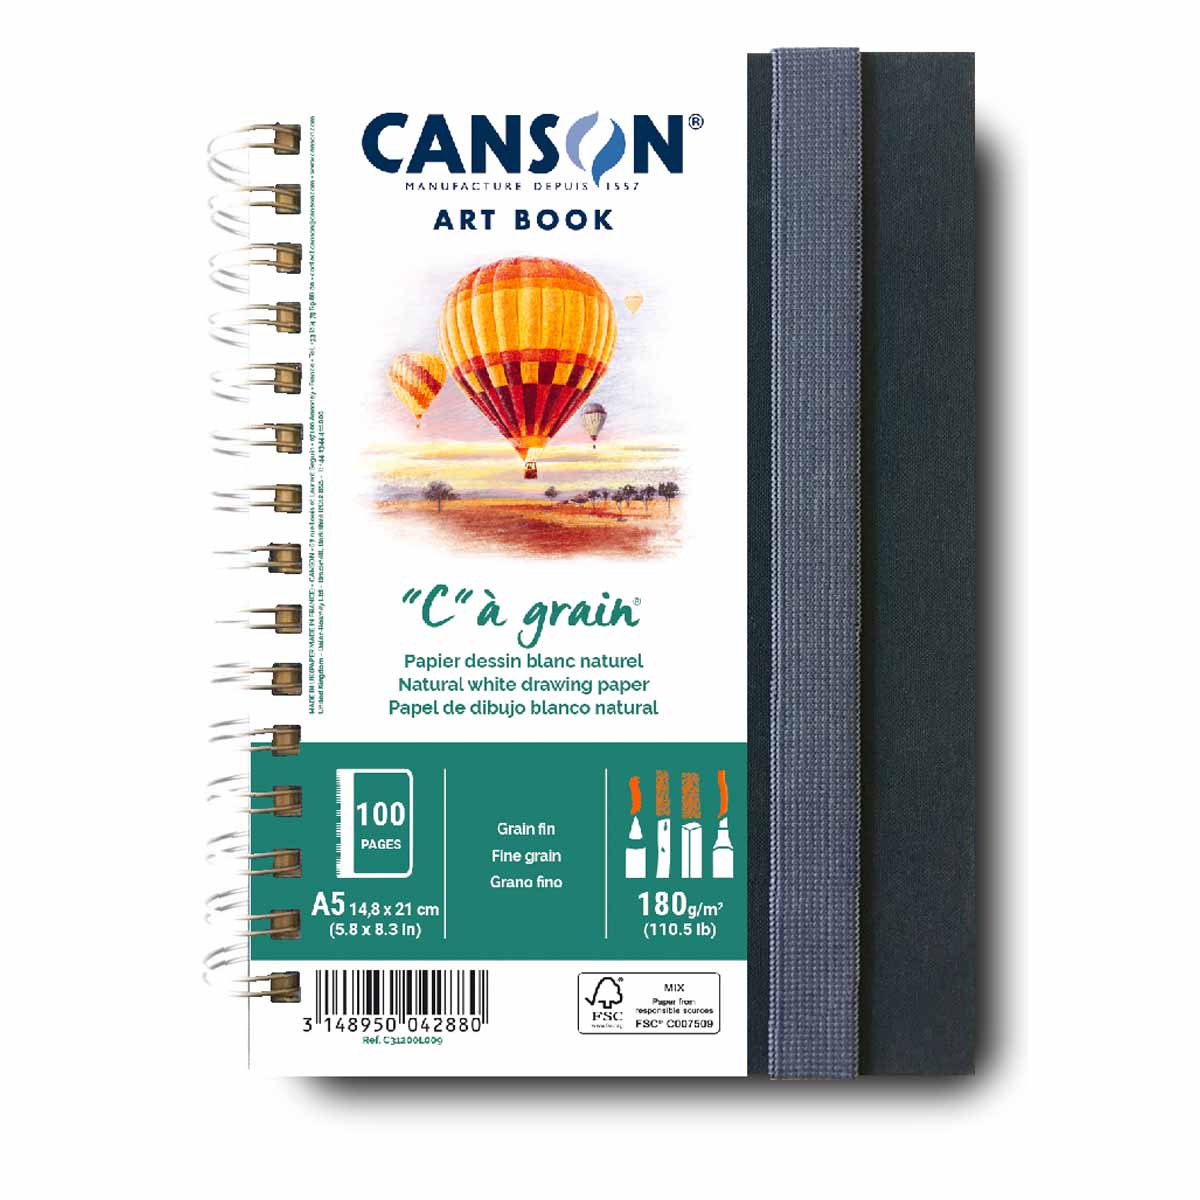 Canson C'A Grain Drawing Art Book 5.8x8.3, 100 Pages